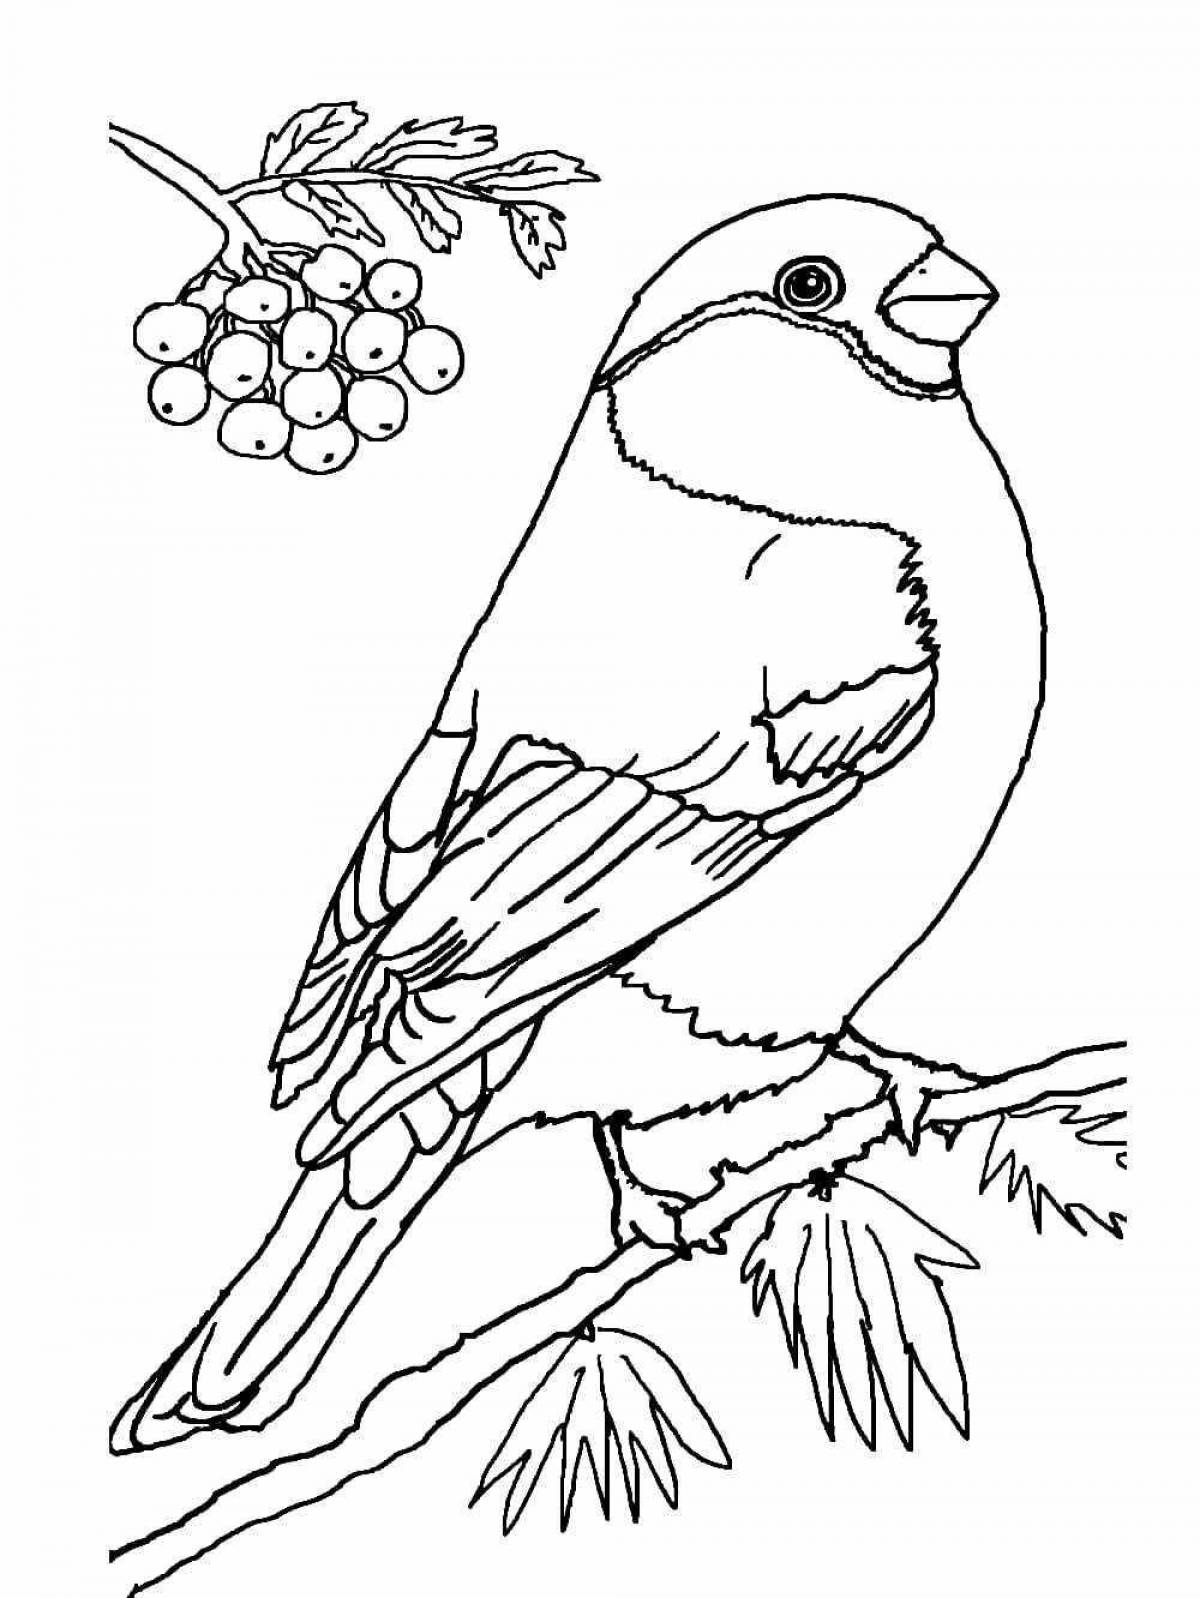 Bright bullfinch and tit coloring page